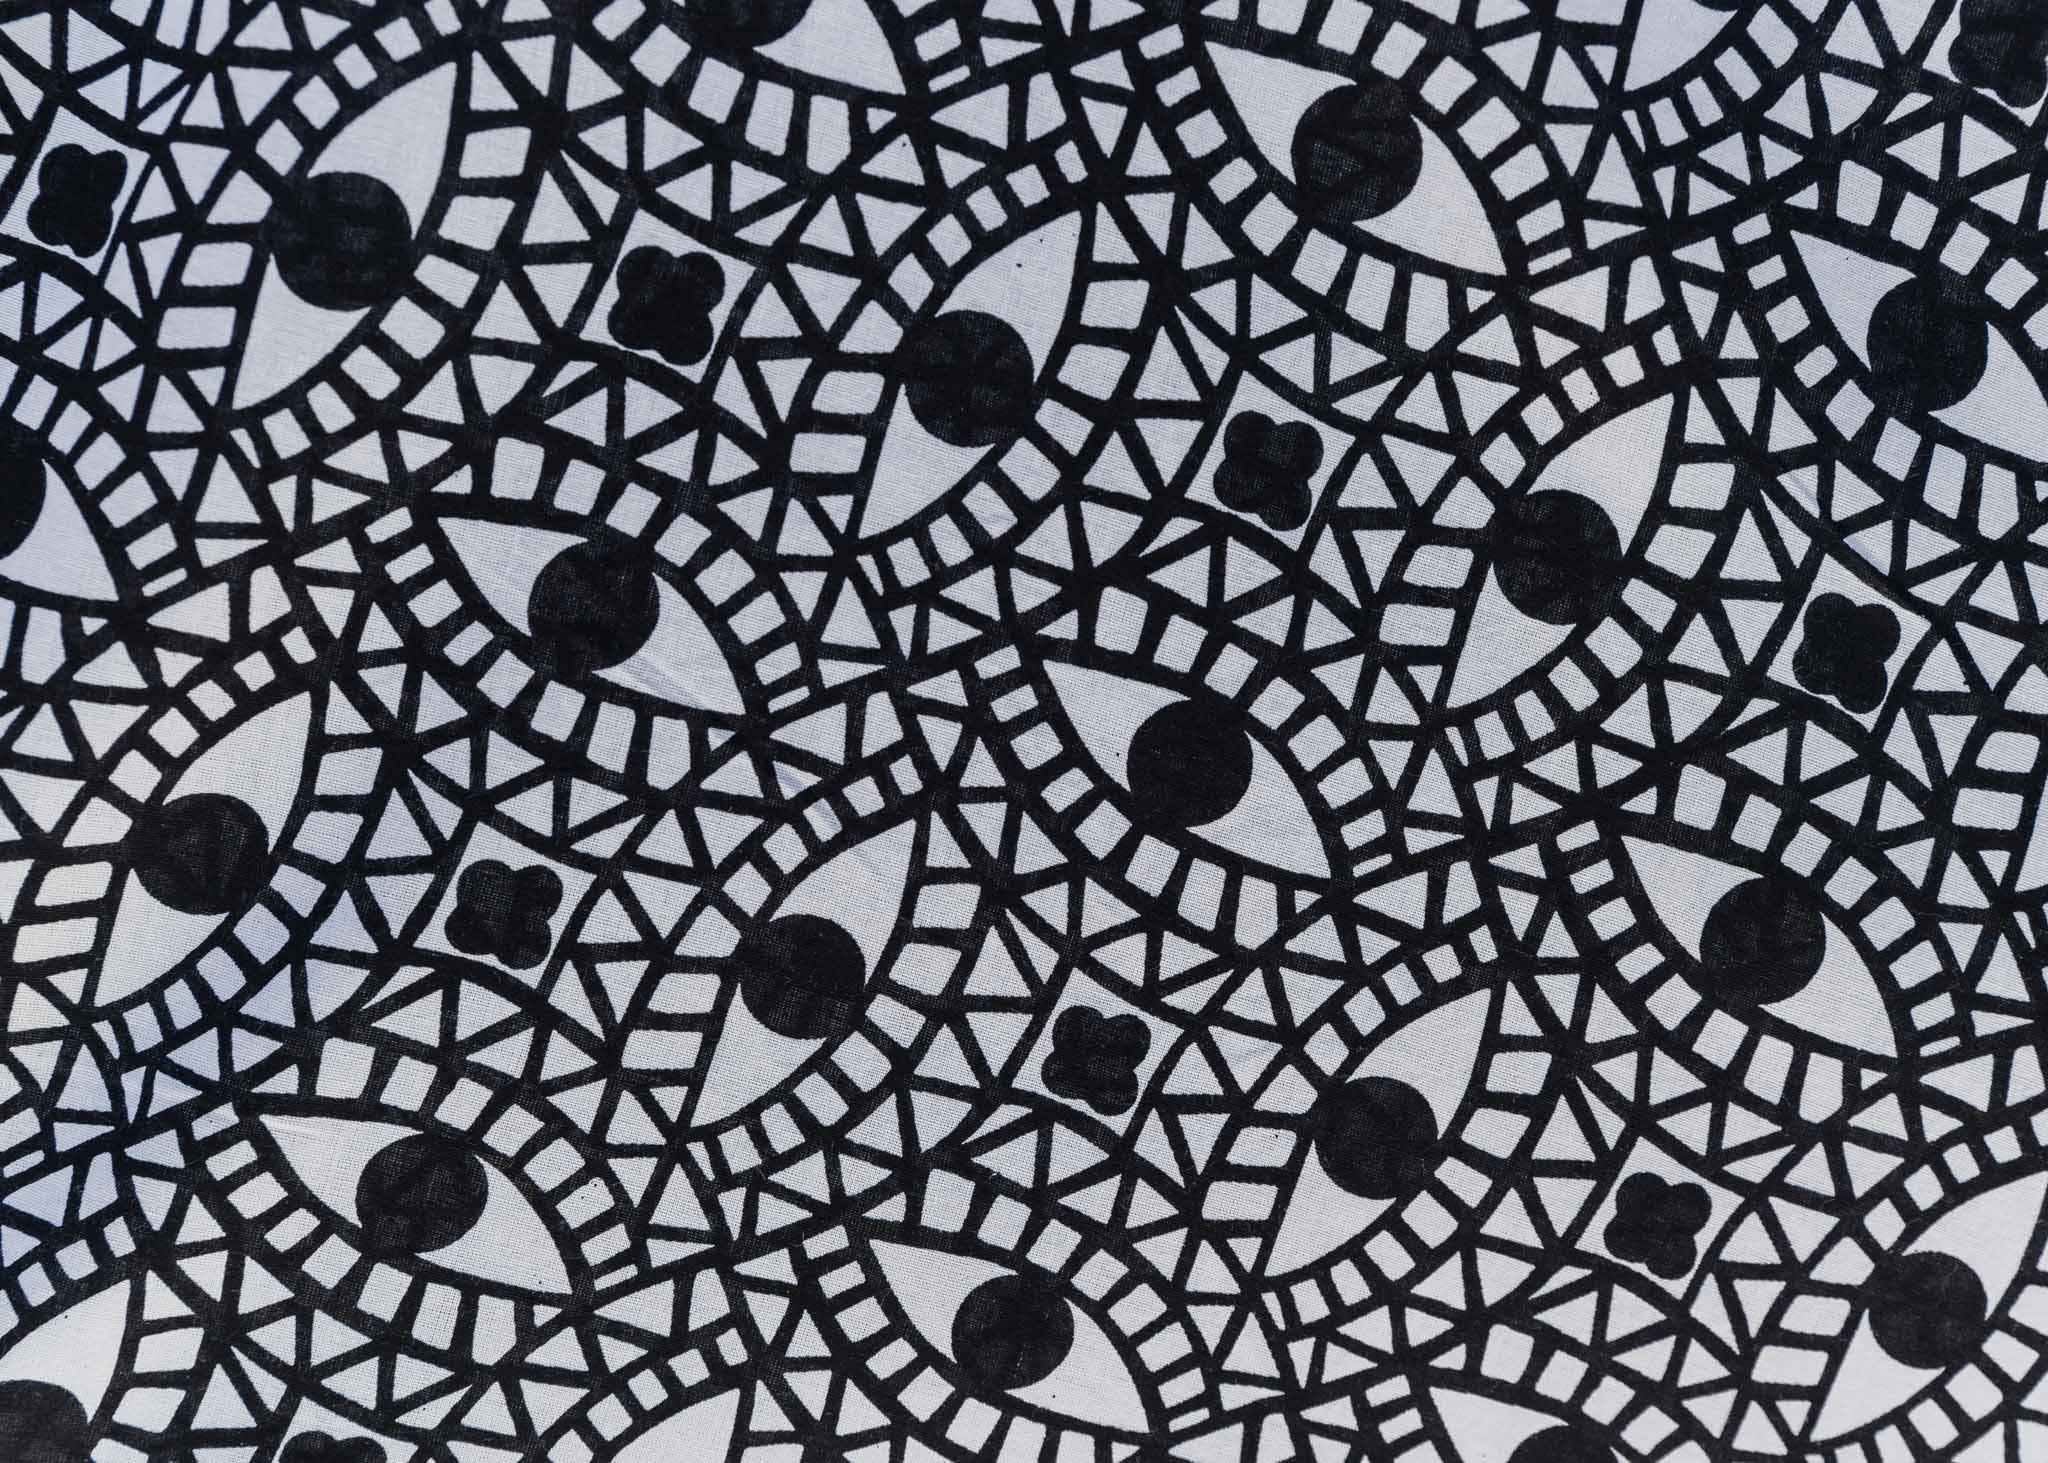 Close up display of black and white dress with mosaic eye pattern, fabric.